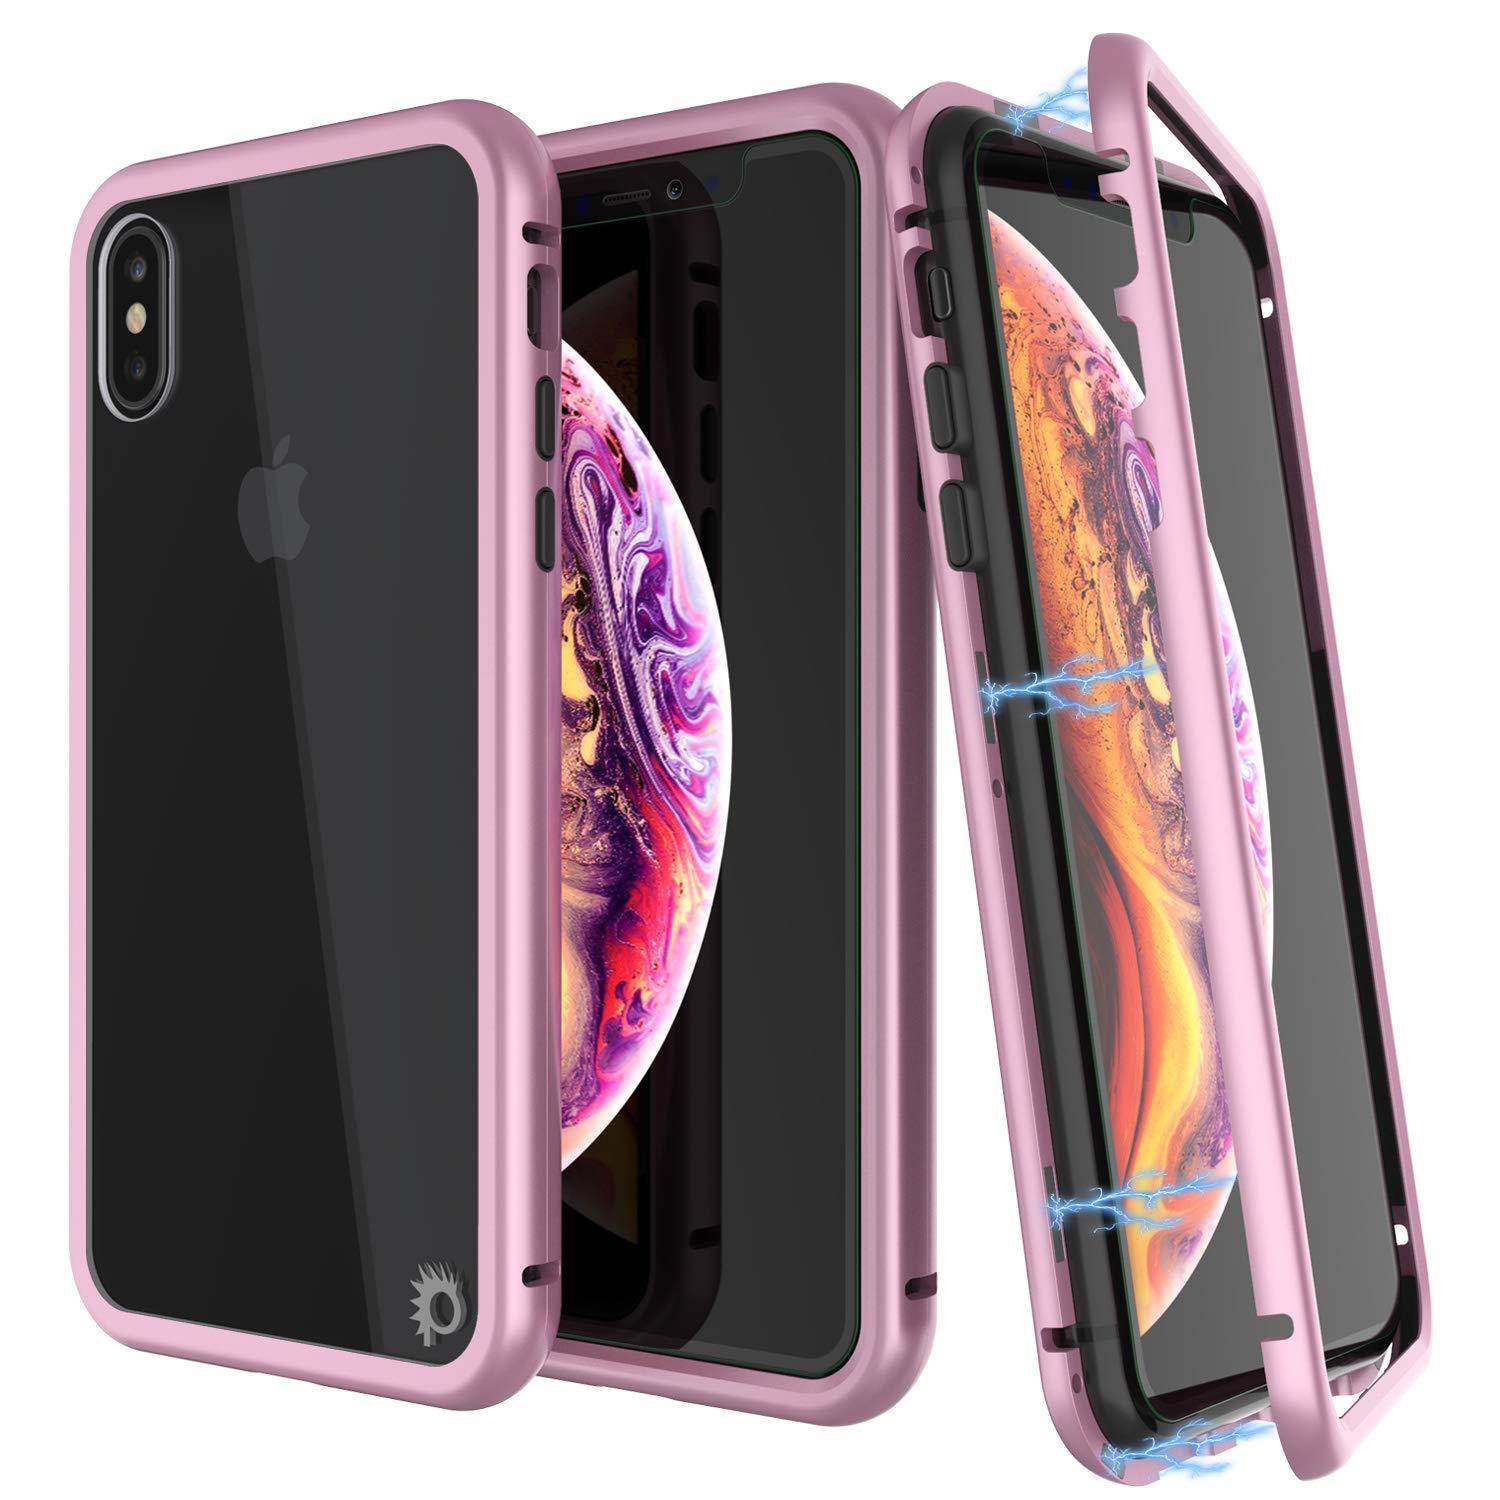 iPhone XS Max Case, Punkcase Magnetic Shield Protective TPU Cover W/ Tempered Glass Screen Protector [Pink]